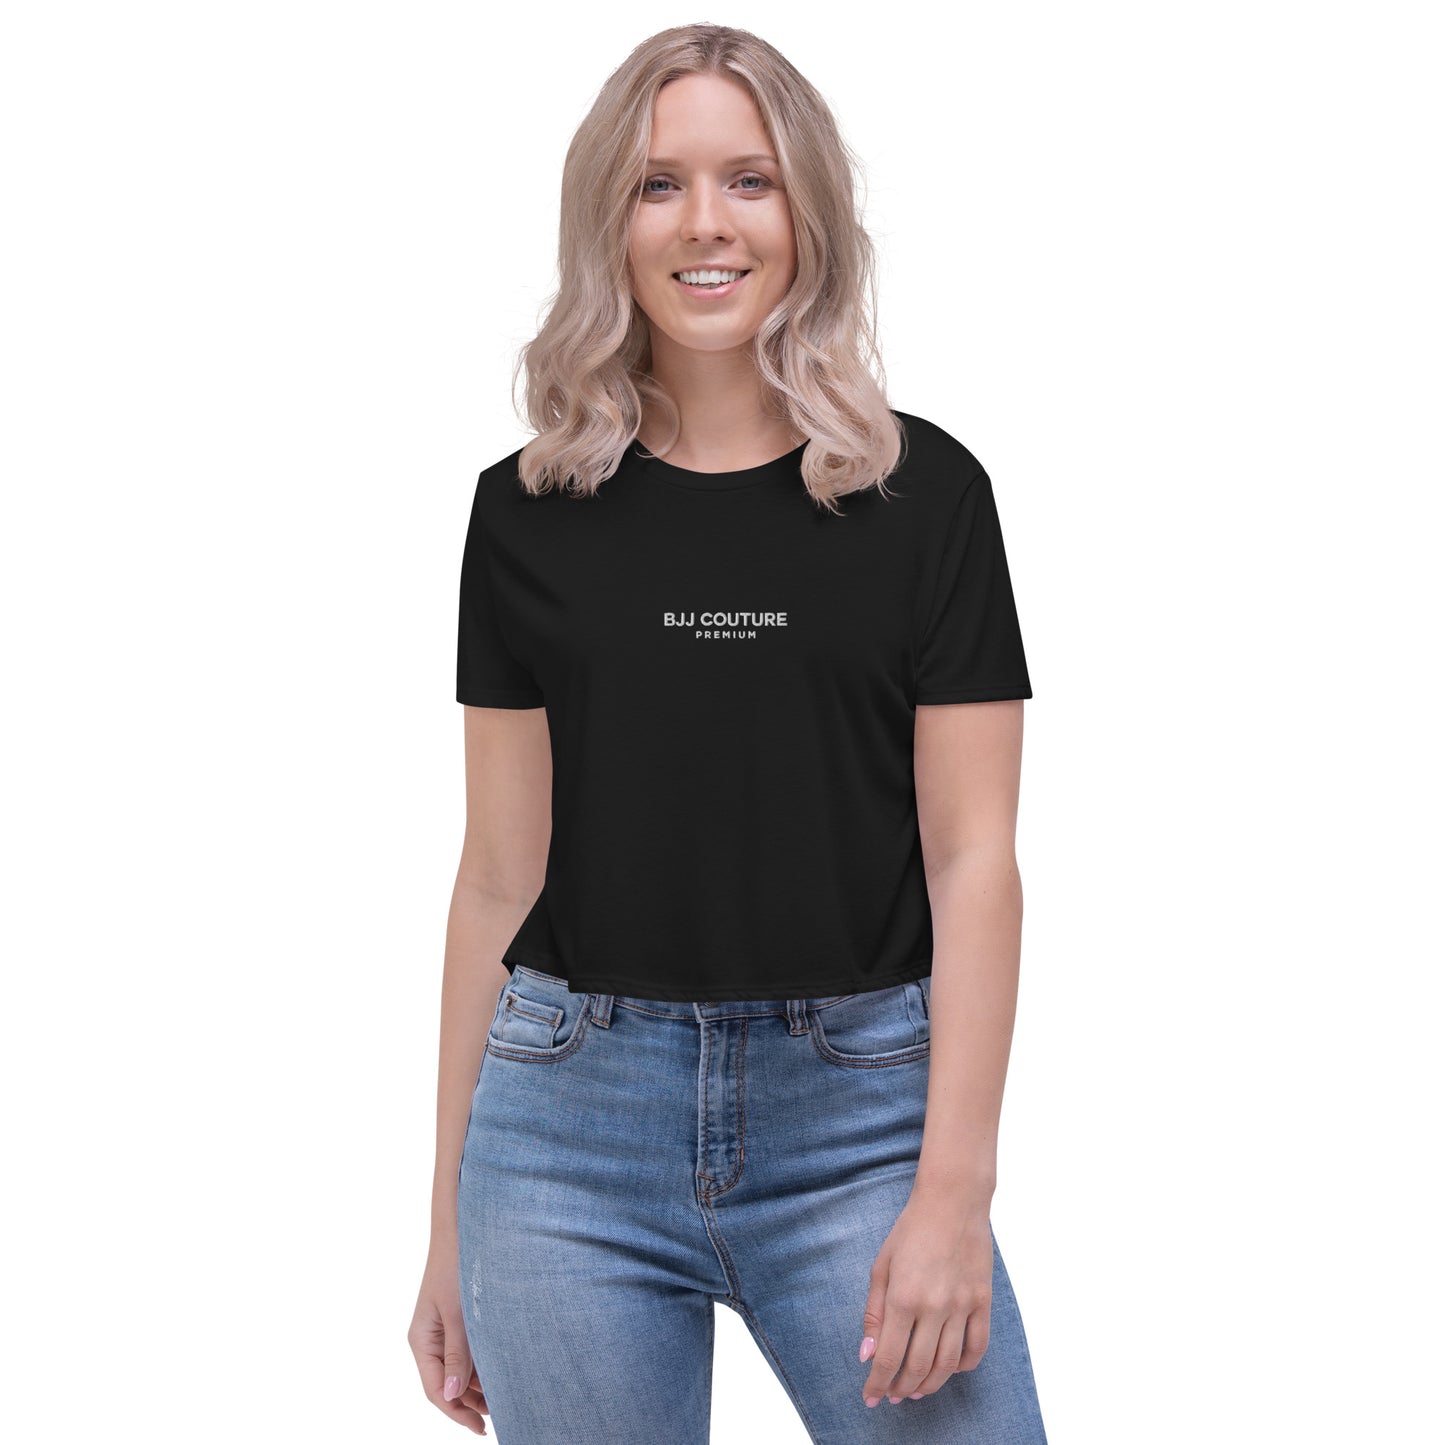 BJJ Couture Premium Embroidered Crop Tee